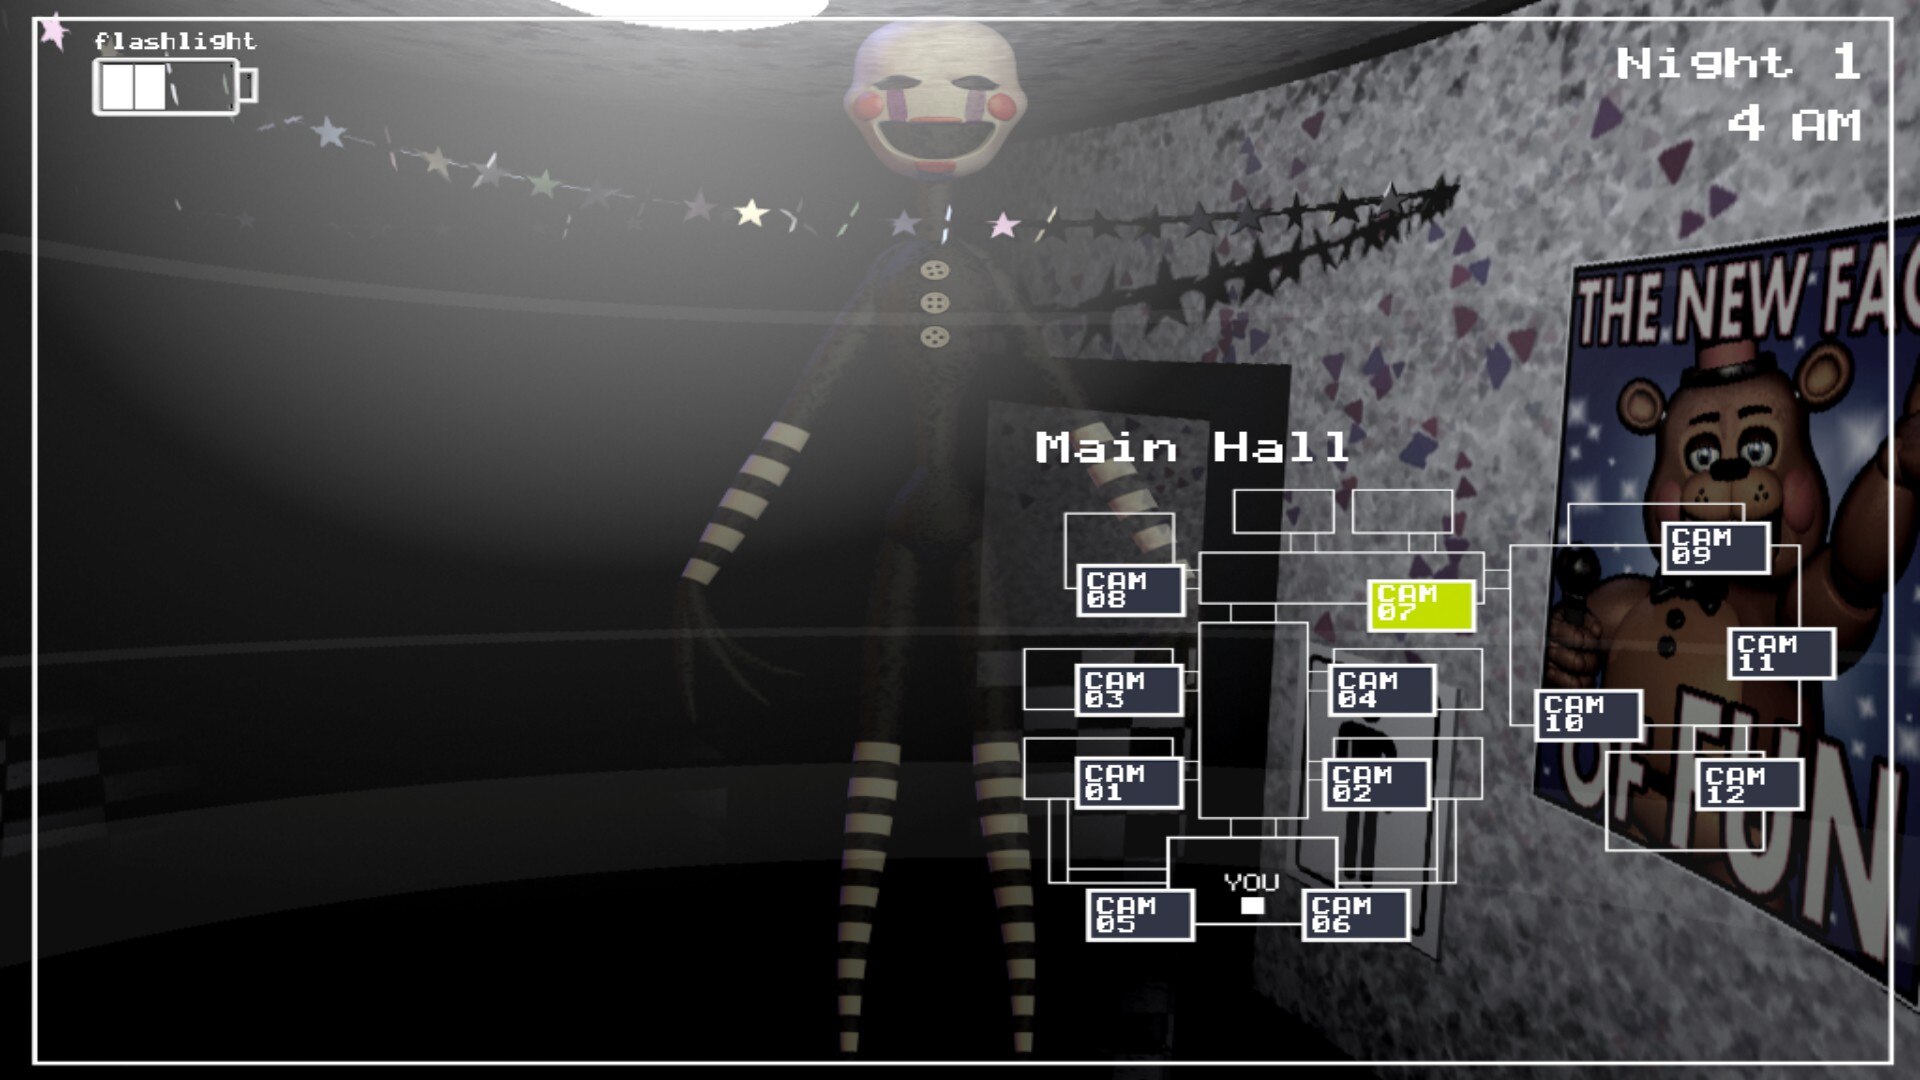 EASTER EGG!  Five Nights At Freddy's 2: Foxy's Death Screen Mini